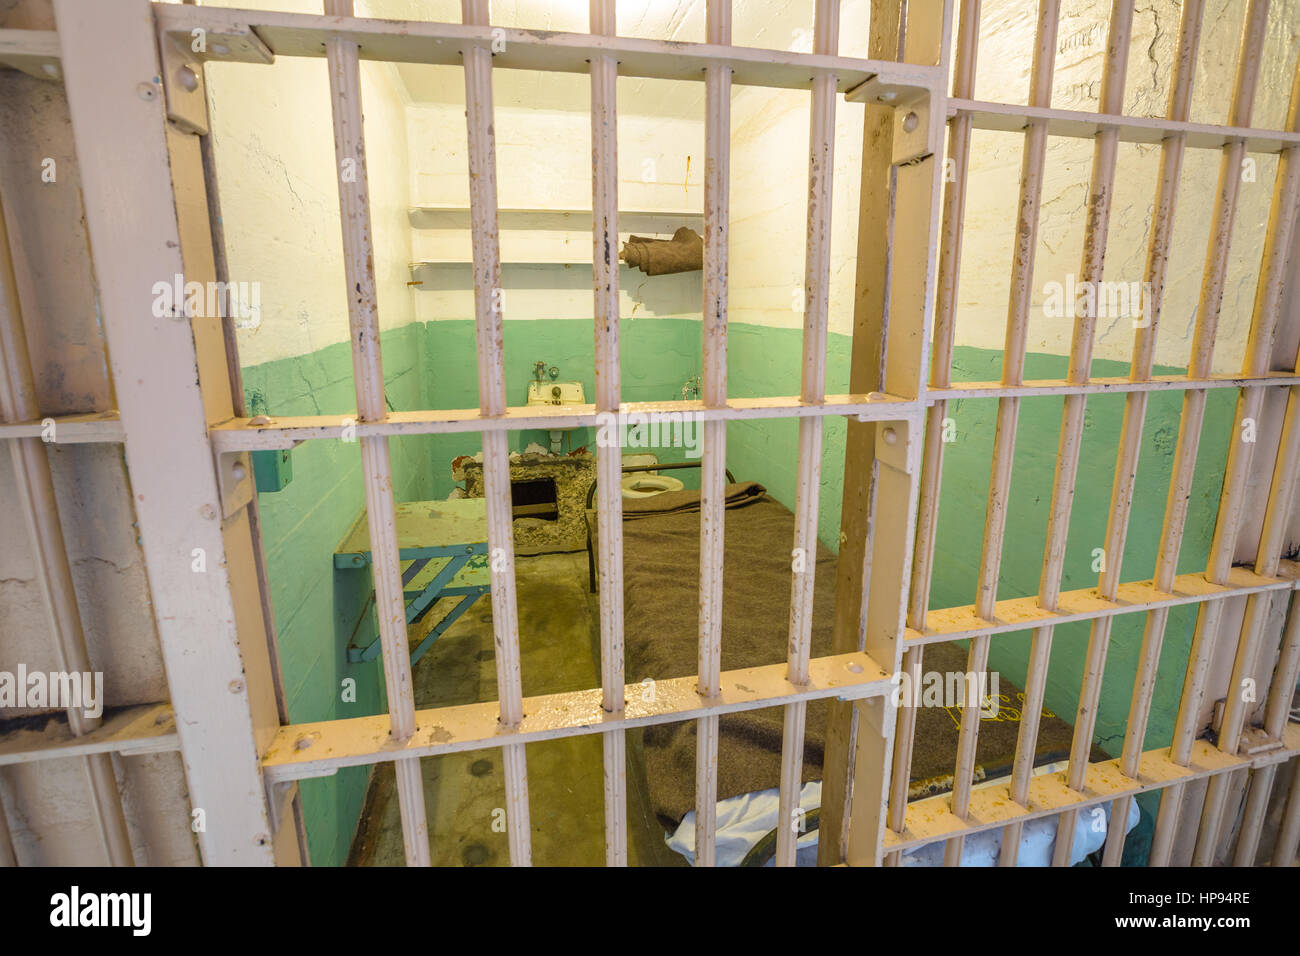 San Francisco, California, United States - August 14, 2016: detail of bars of a single cell of Alcatraz prison from outside view. Popular attraction i Stock Photo